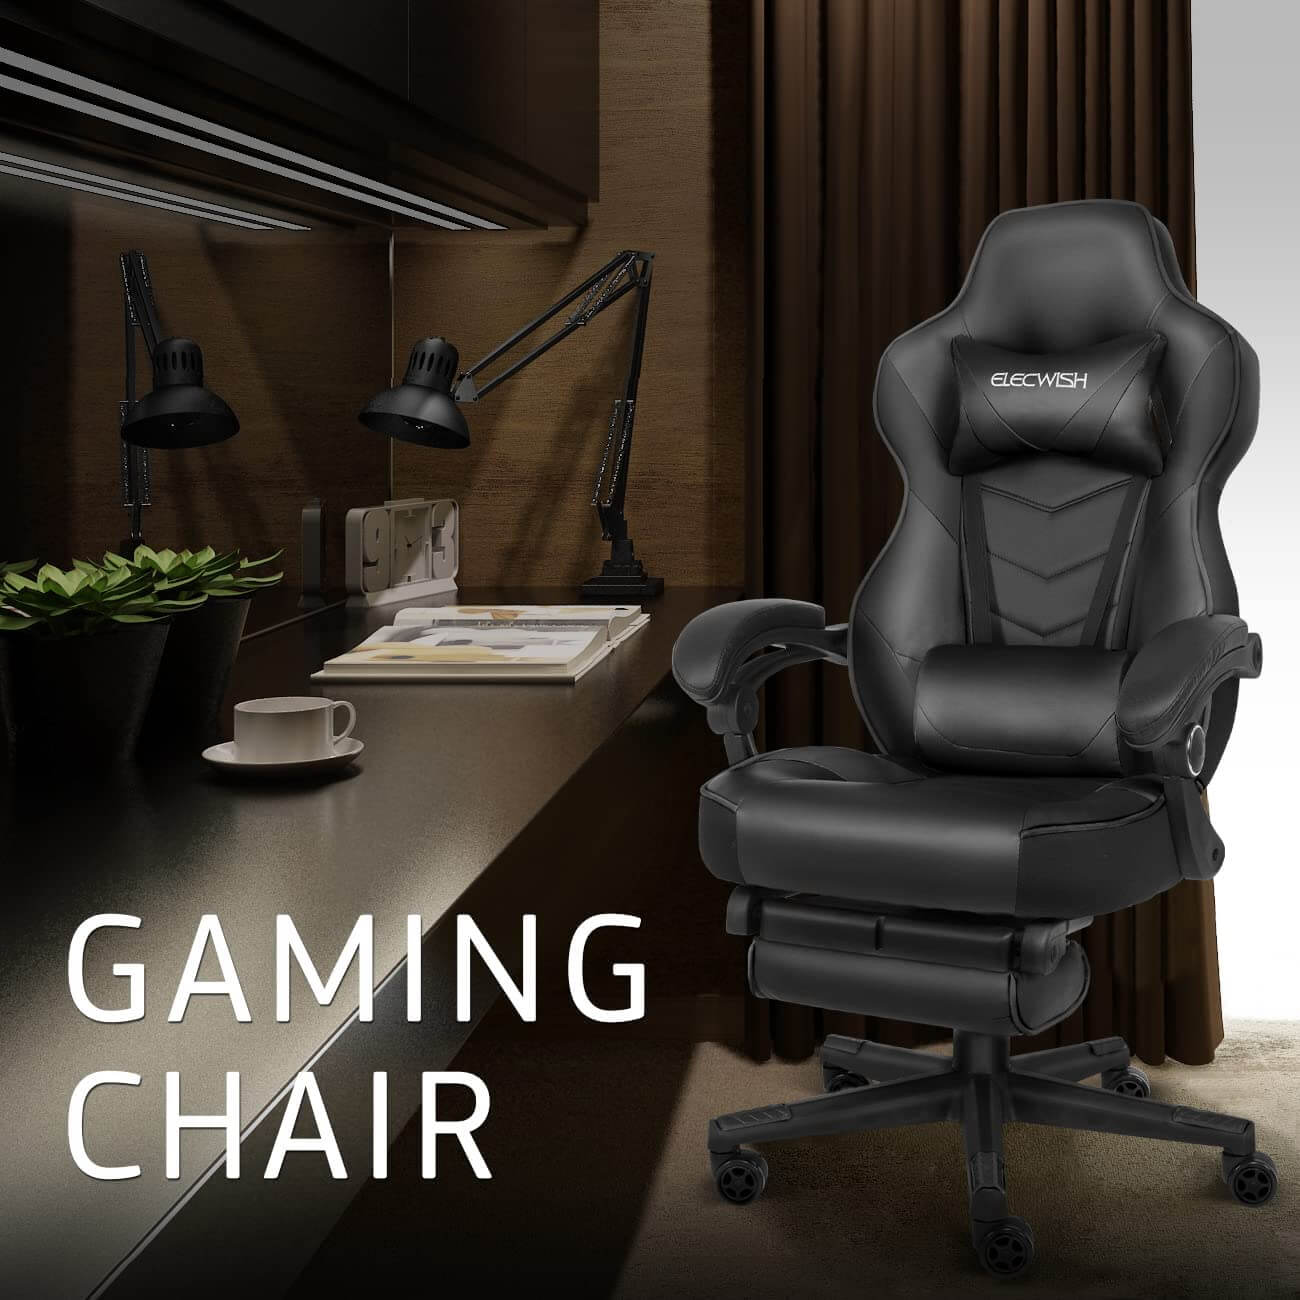 Elecwish black massage gaming chair with footrest OC112 display